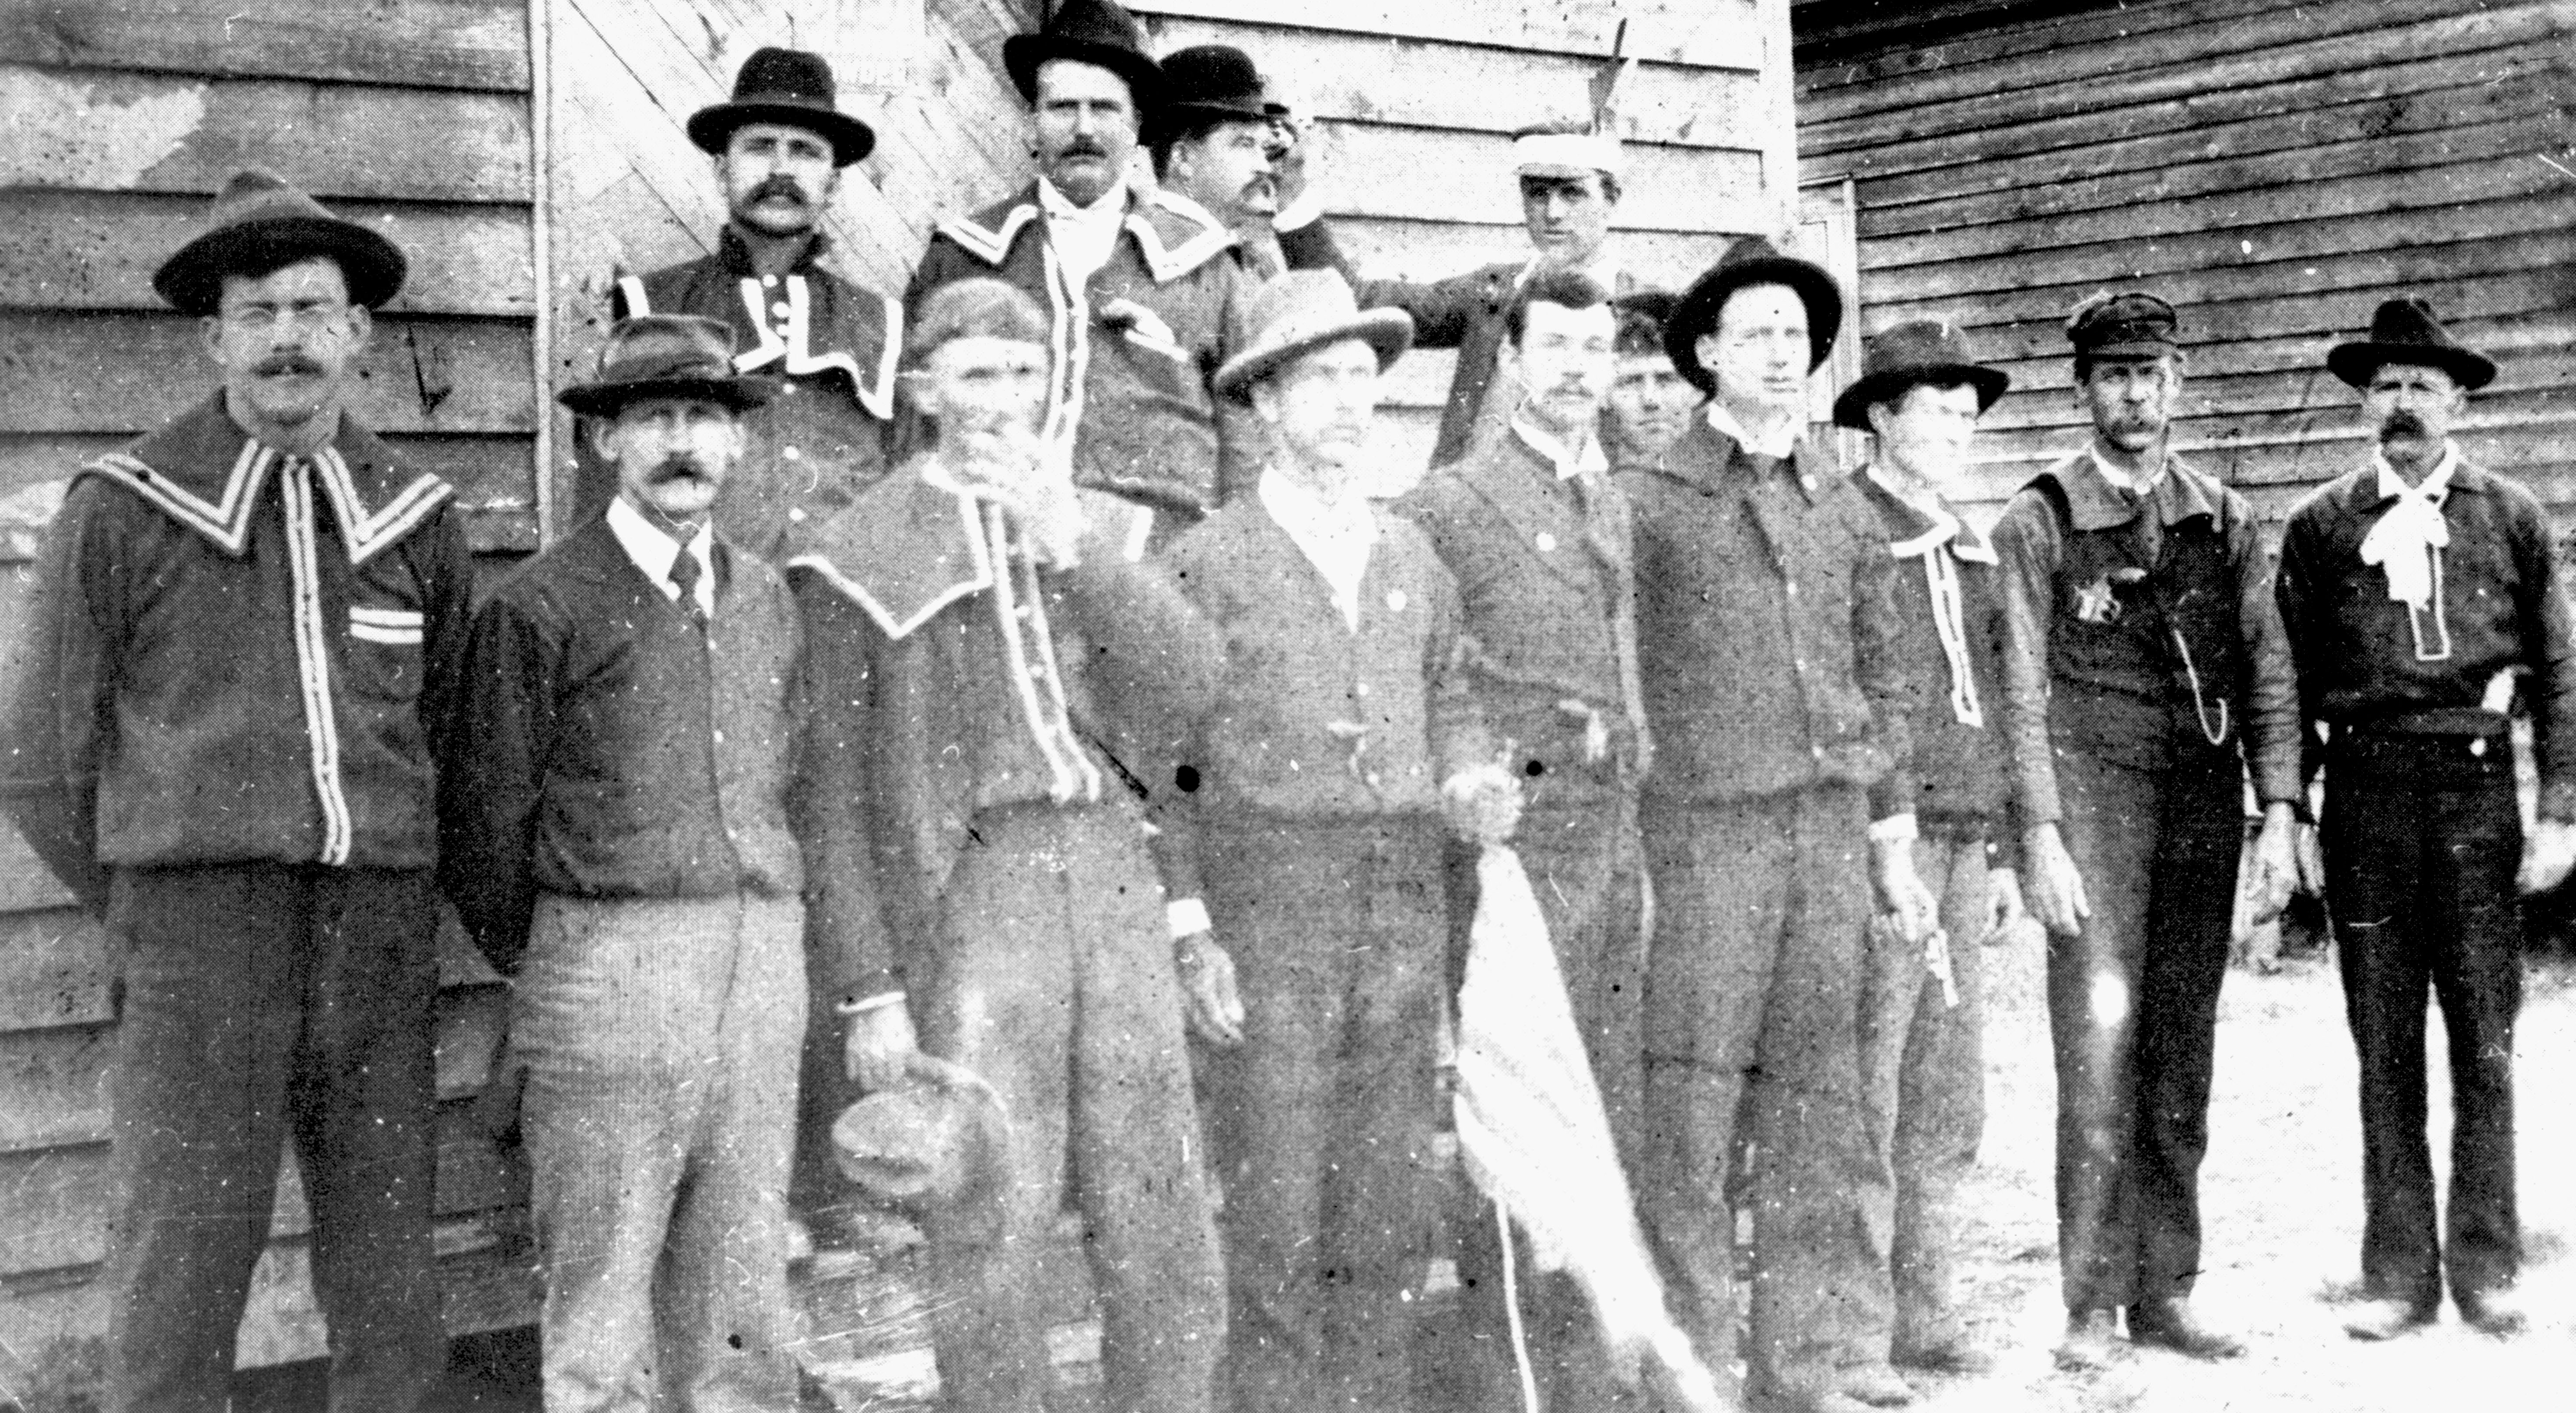 The Red Shirts, pictured here in 1898, were one of many paramilitary groups that terrorized black and white republican voters during the 1876 gubernatorial election.